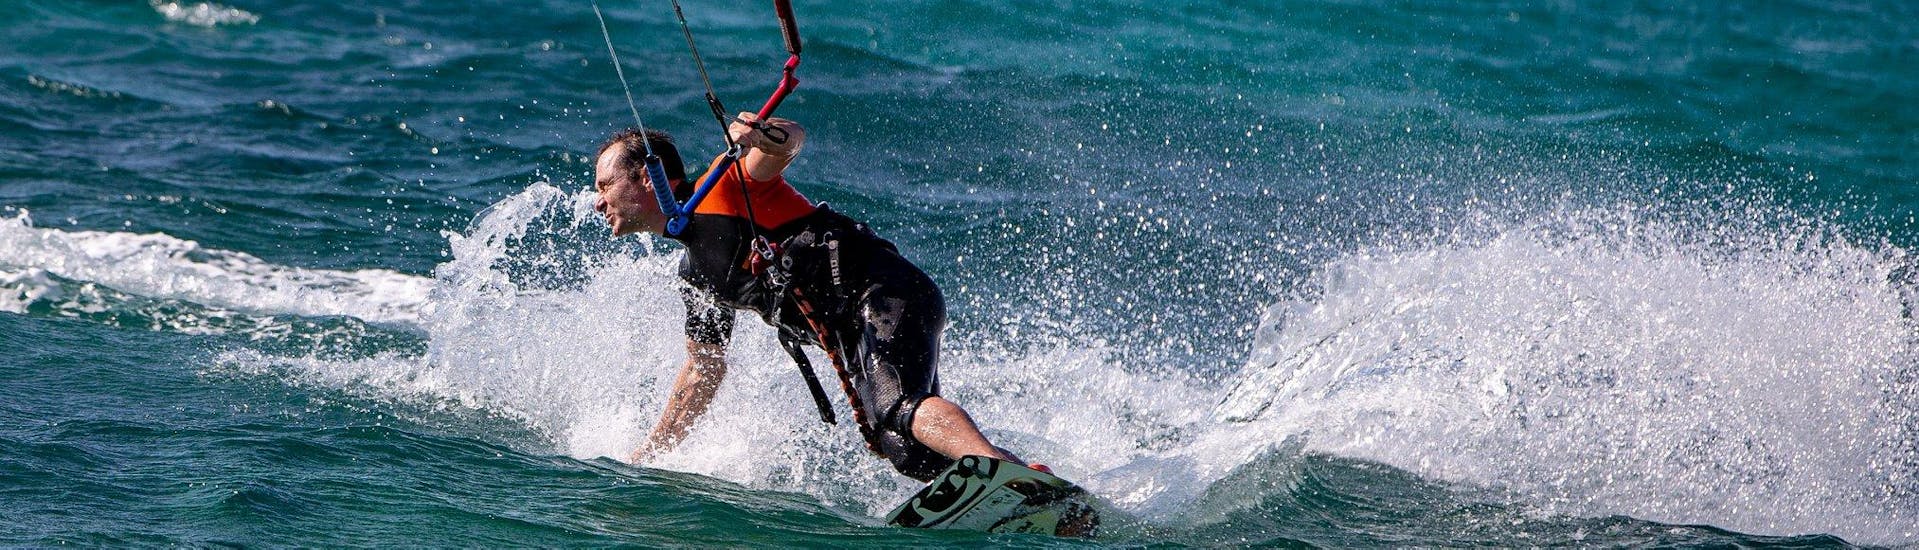 Private Kitesurfing Lessons for Teens & Adults - Advanced.